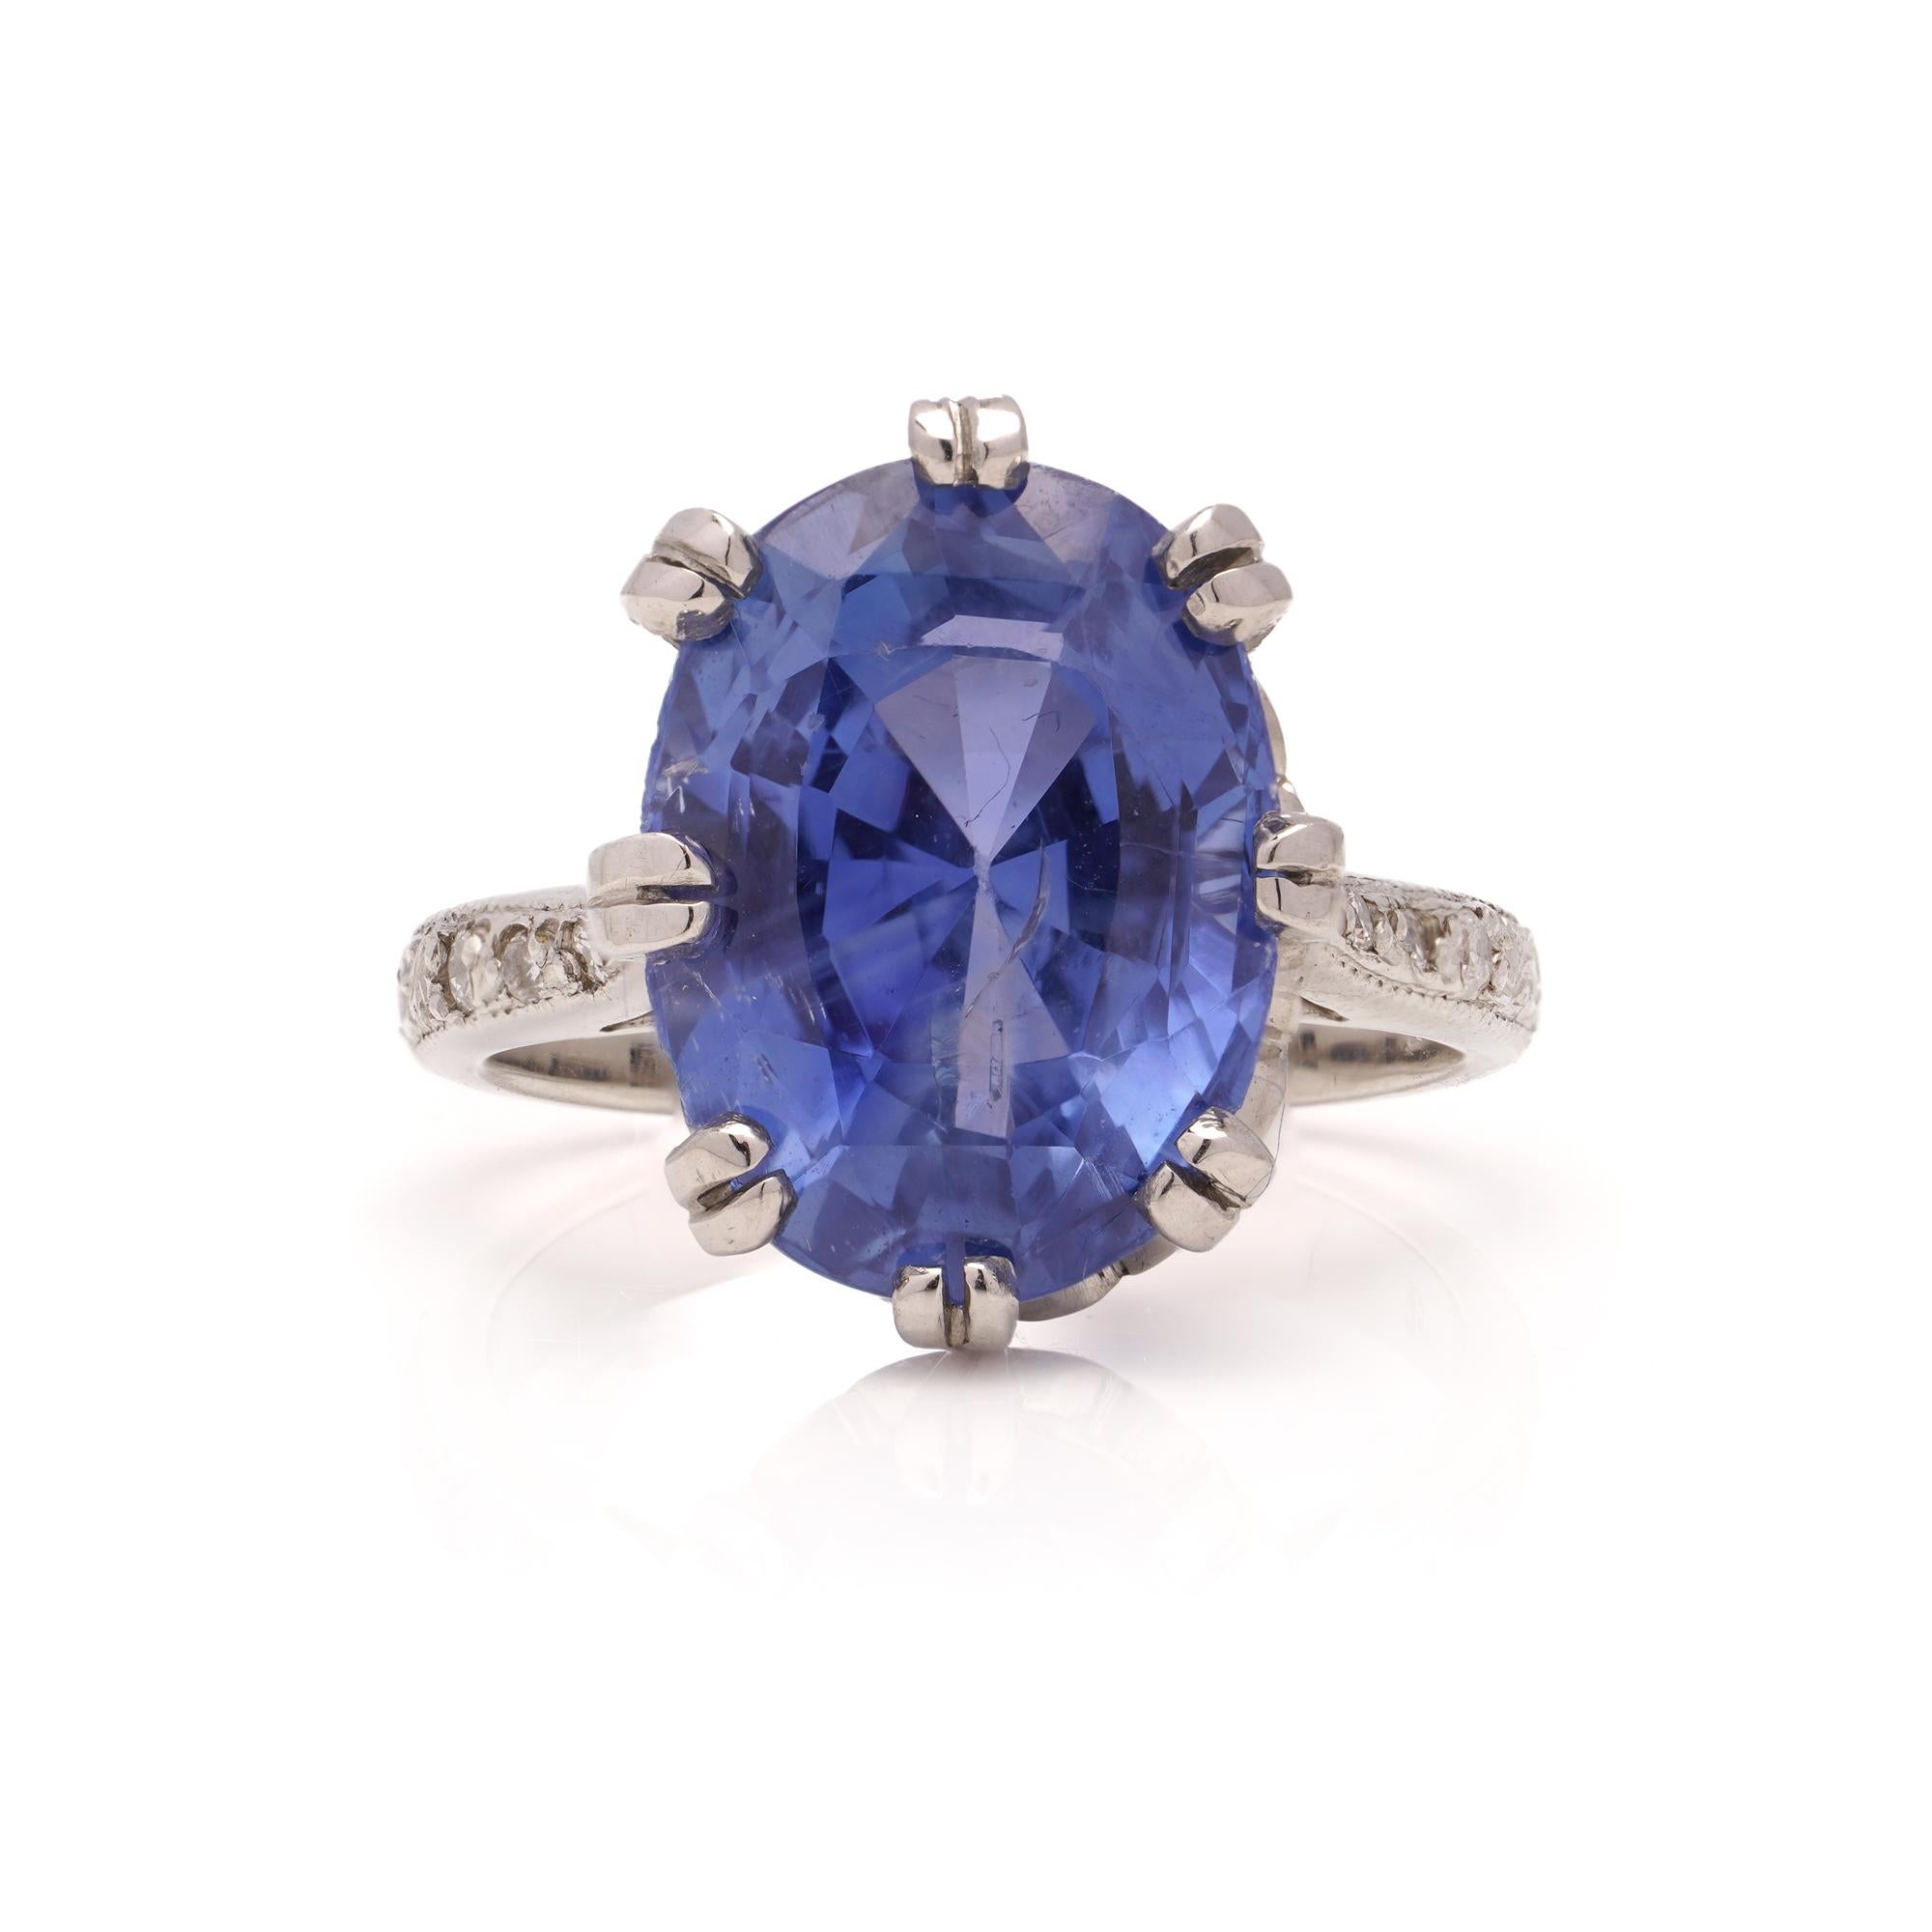 950 Platinum 5.50 carats of oval faceted sapphire and diamond ring. 
Hallmarked with Platinum mark. 

Dimensions -
Finger Size (UK) = K 1/2 ( EU) = 52.5 (US) = 5.75 
Weight: 9.00 grams

Diamonds -
Cut: Round brilliant 
Quantity: 6 
Carat weight: